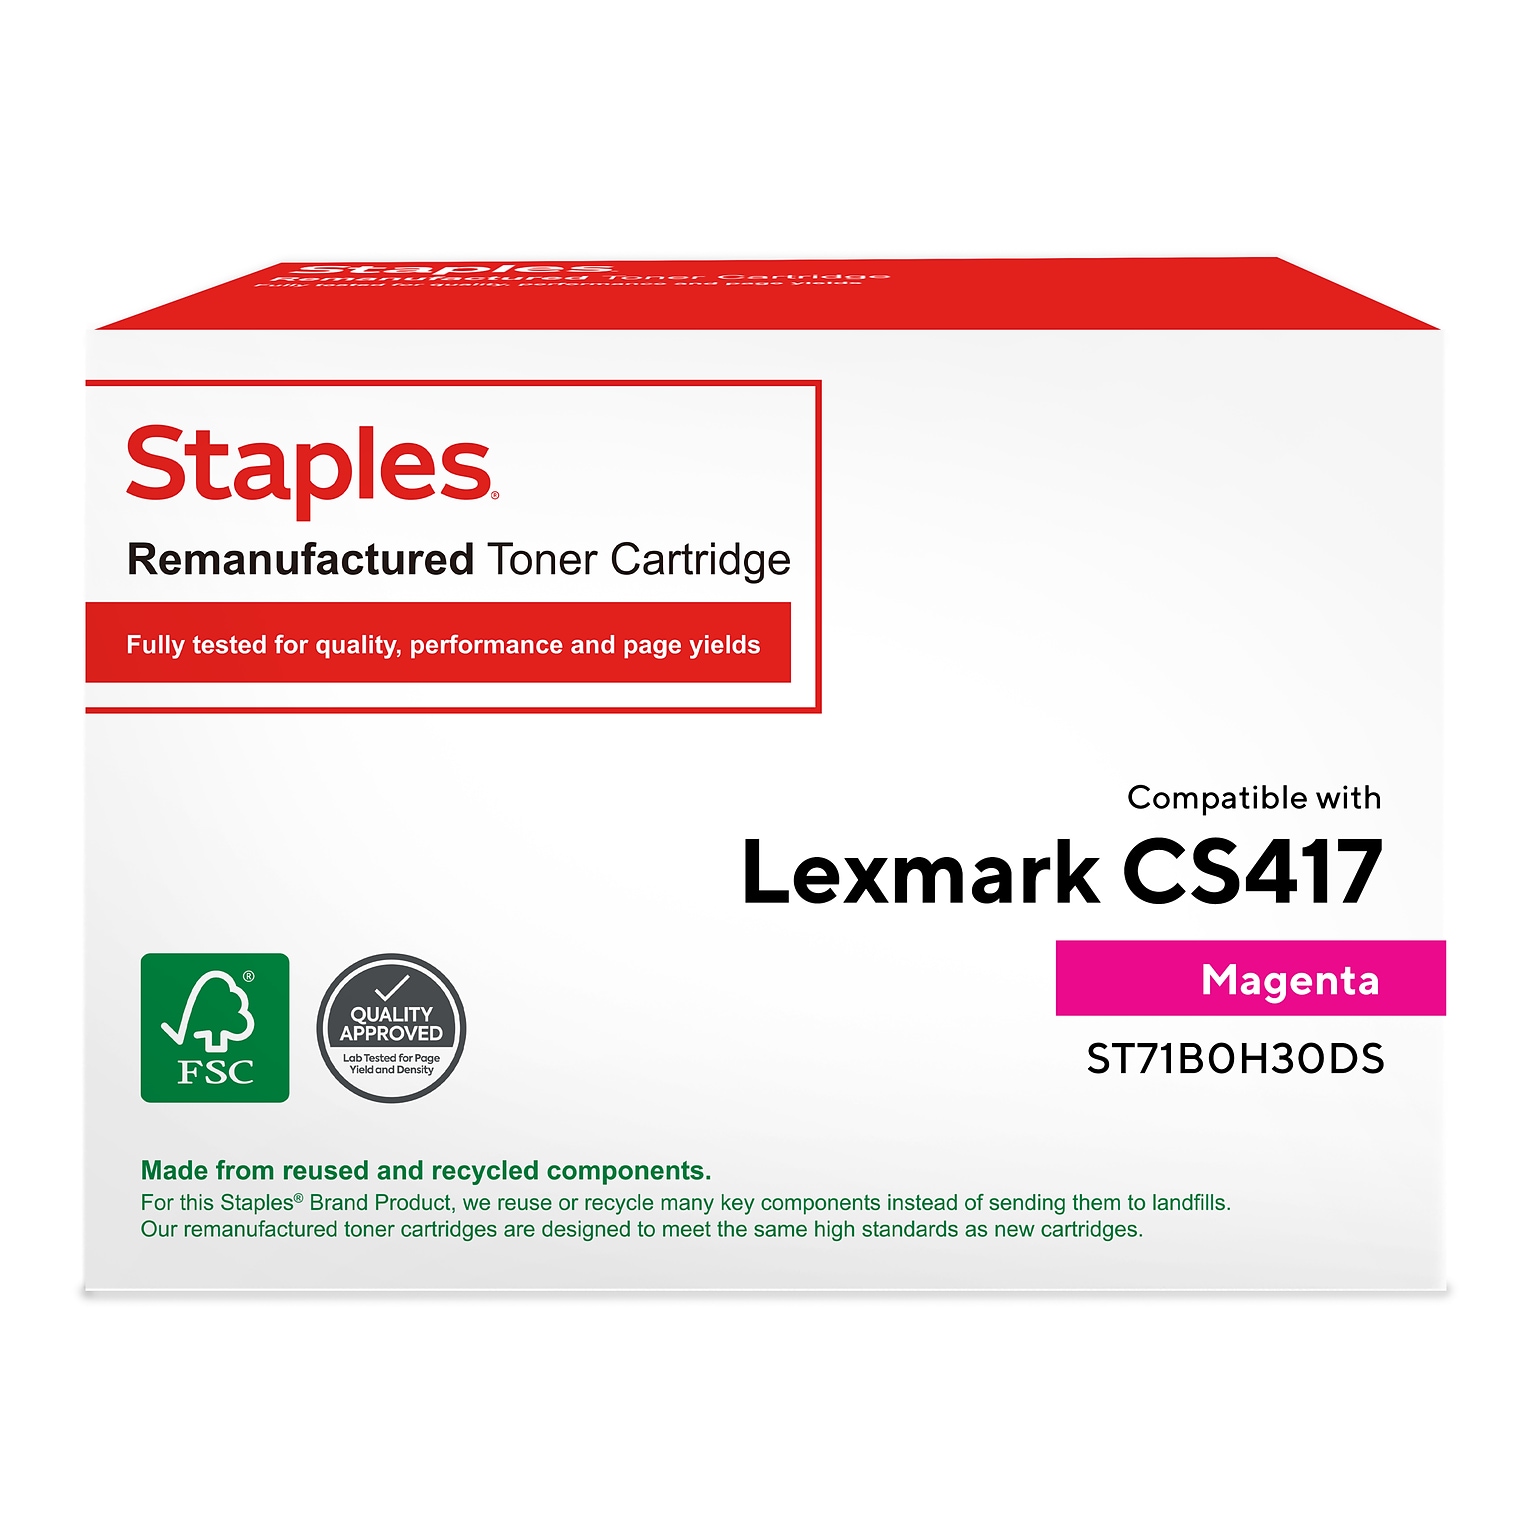 Staples Remanufactured Magenta High Yield Toner Cartridge Replacement for Lexmark (TR71B0H30DS/ST71B0H30DS)